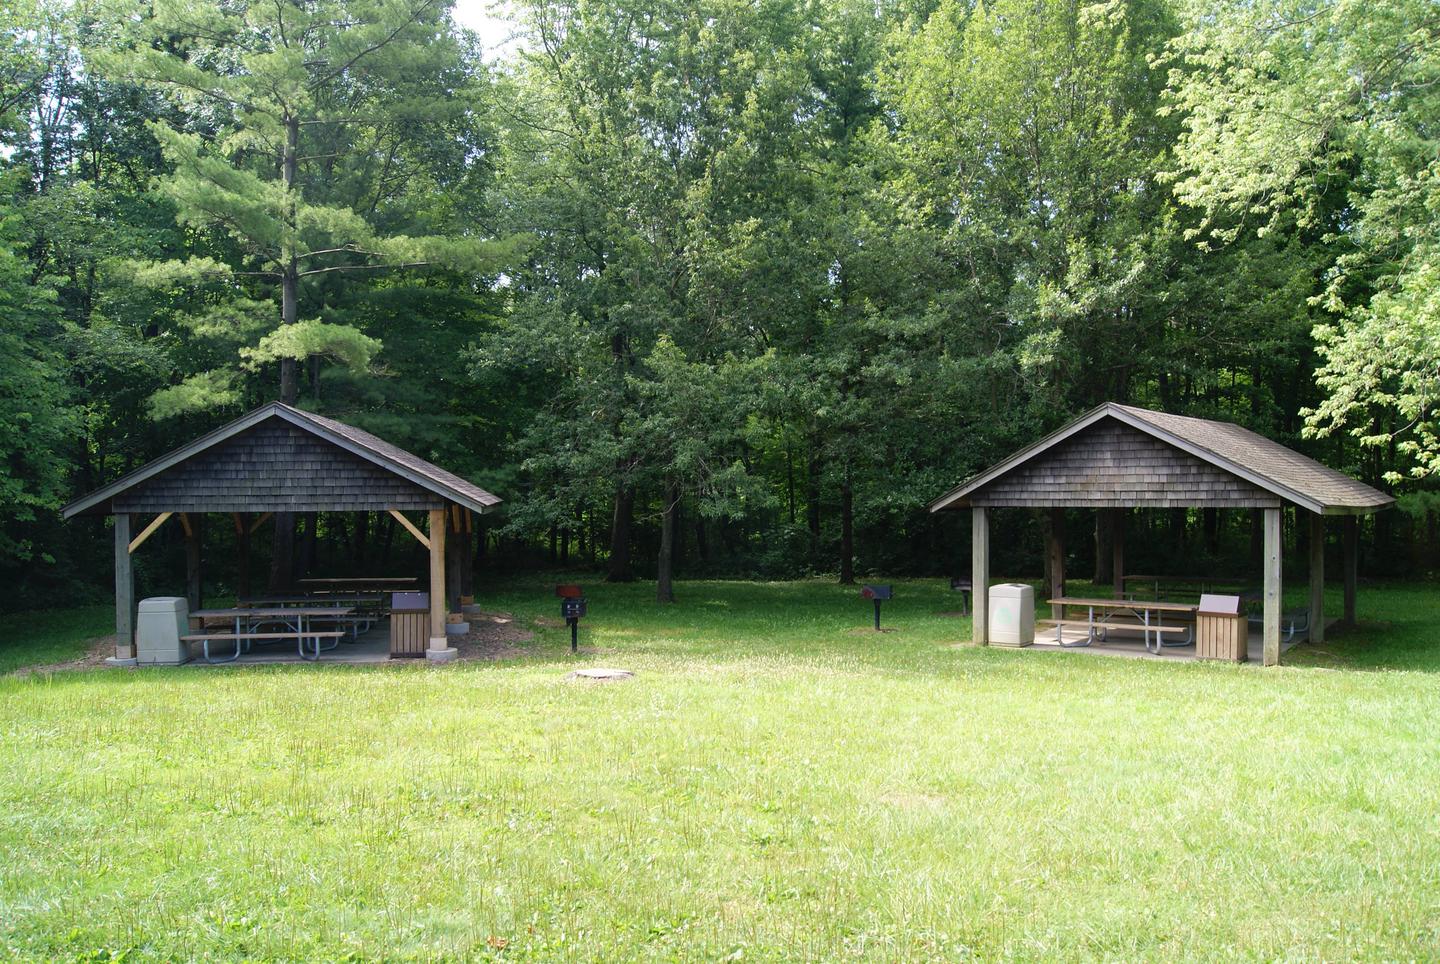 Chellberg Farm Picnic Shelters 2 and 3Shelter 2 and 3 next to each other.